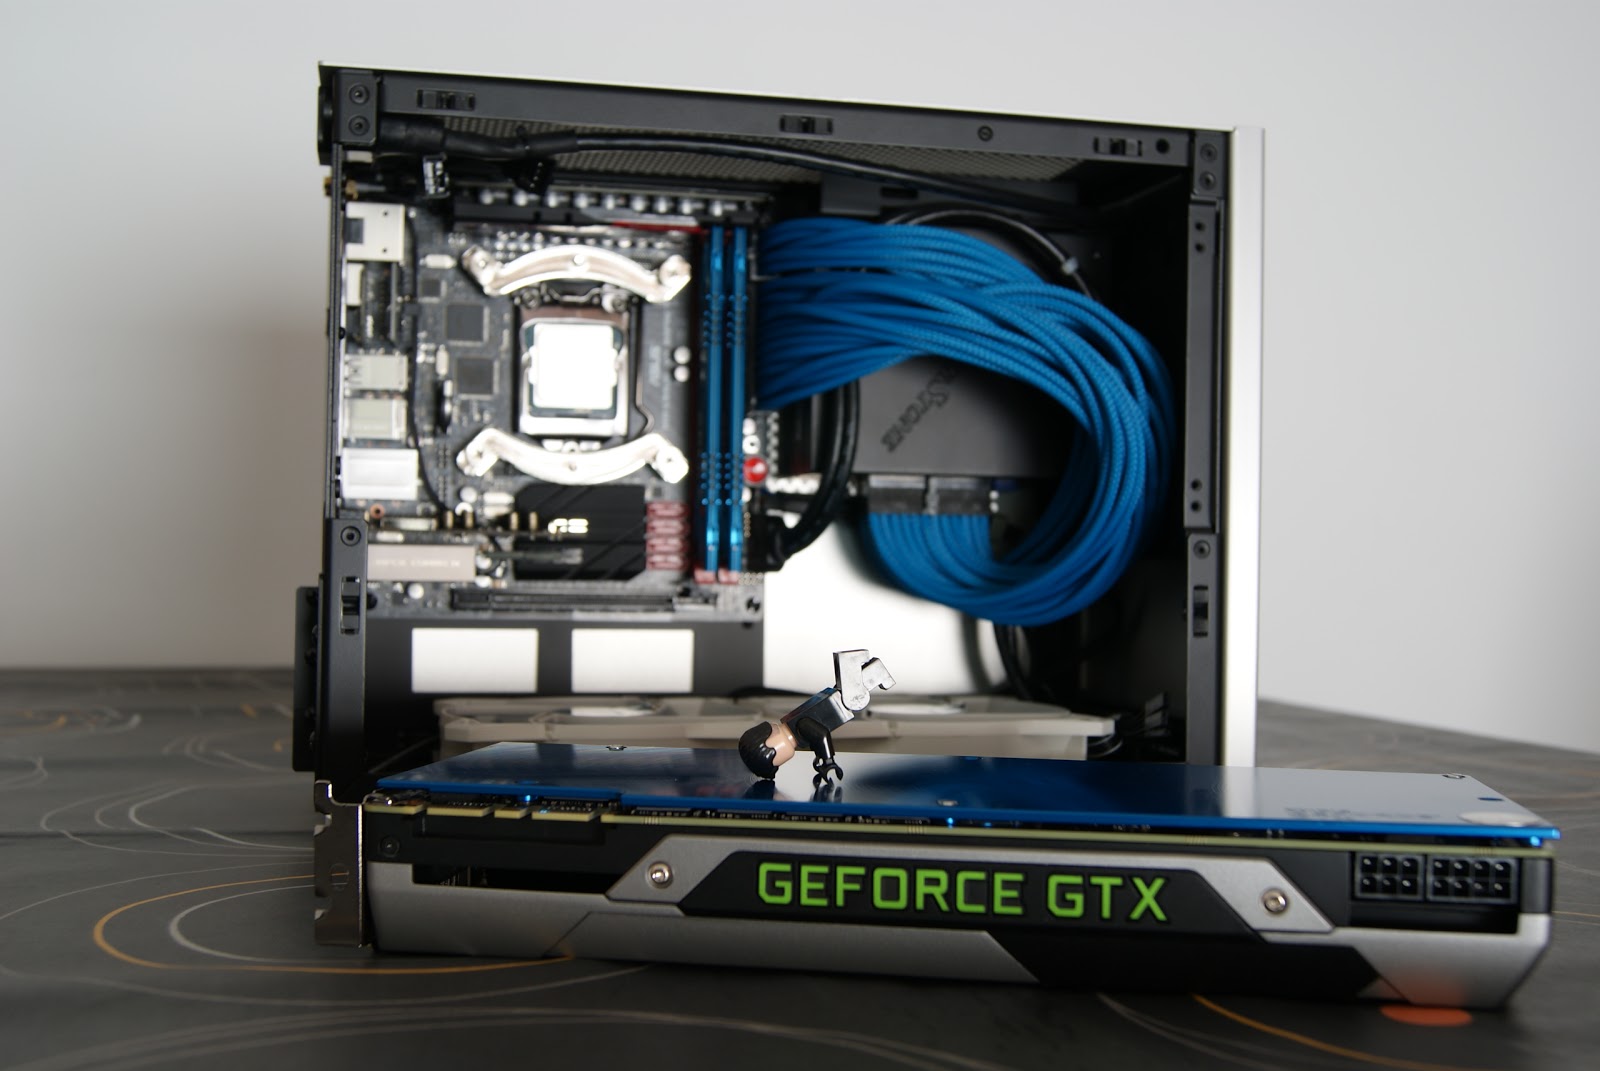 GTX Titan Black with backplate - Minimax3 by dPunisher